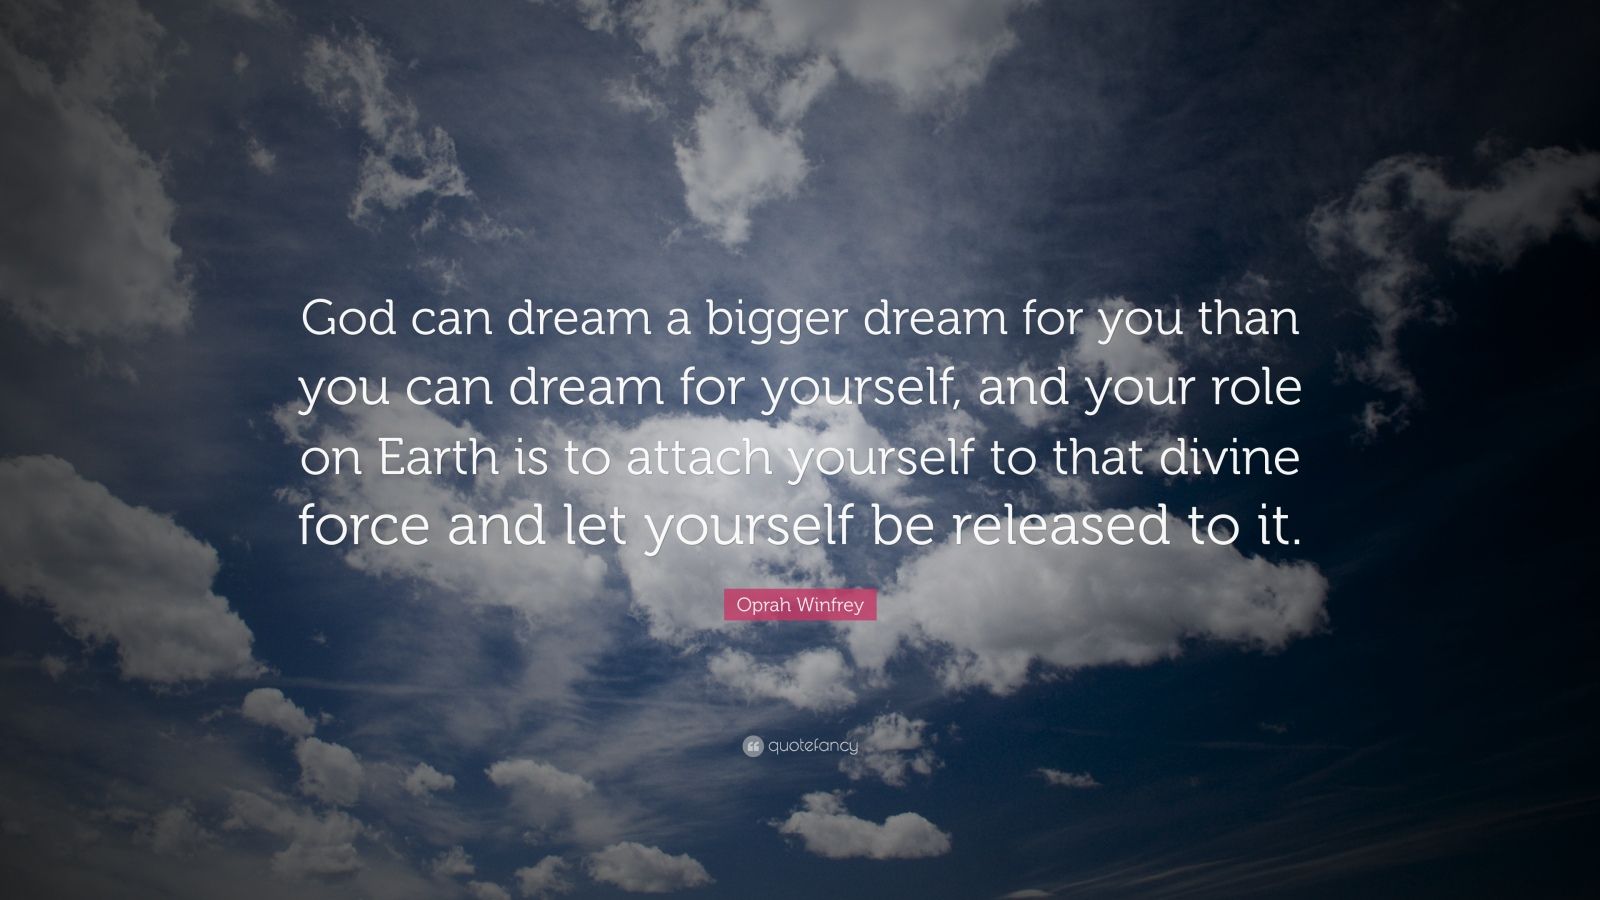 Oprah Winfrey Quote: “God can dream a bigger dream for you than you can ...